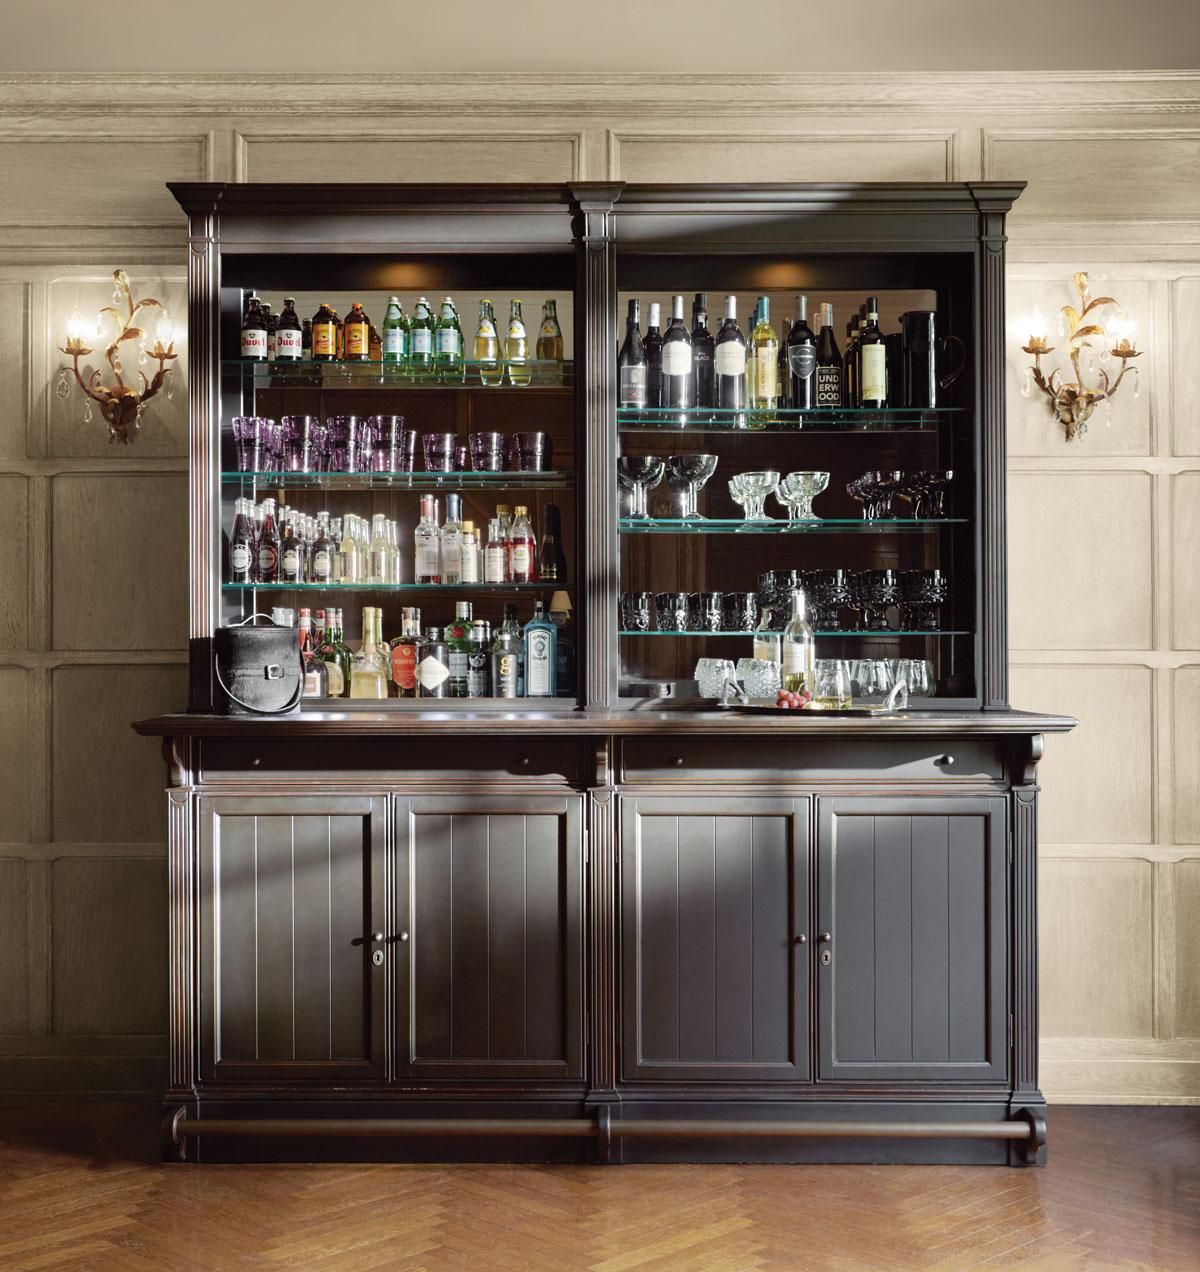 Furniture For A Home Bar Or Entertainment Area